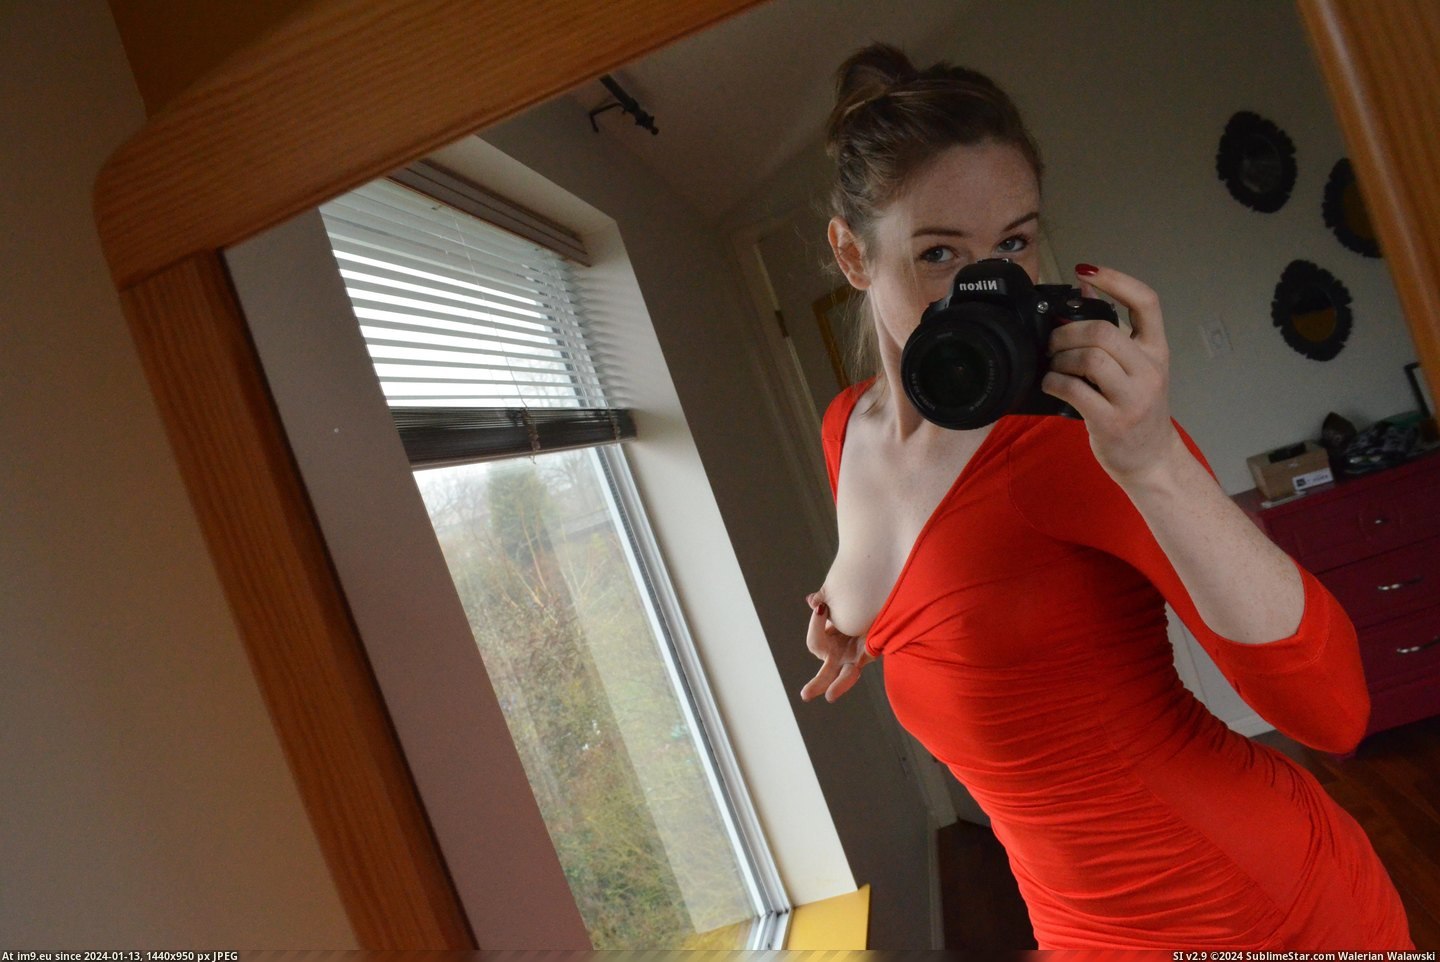 #Tight #Dress #Xmas #Too #Party [Gonewild] Is this dress too tight [f]or an Xmas party? 1 Pic. (Image of album My r/GONEWILD favs))